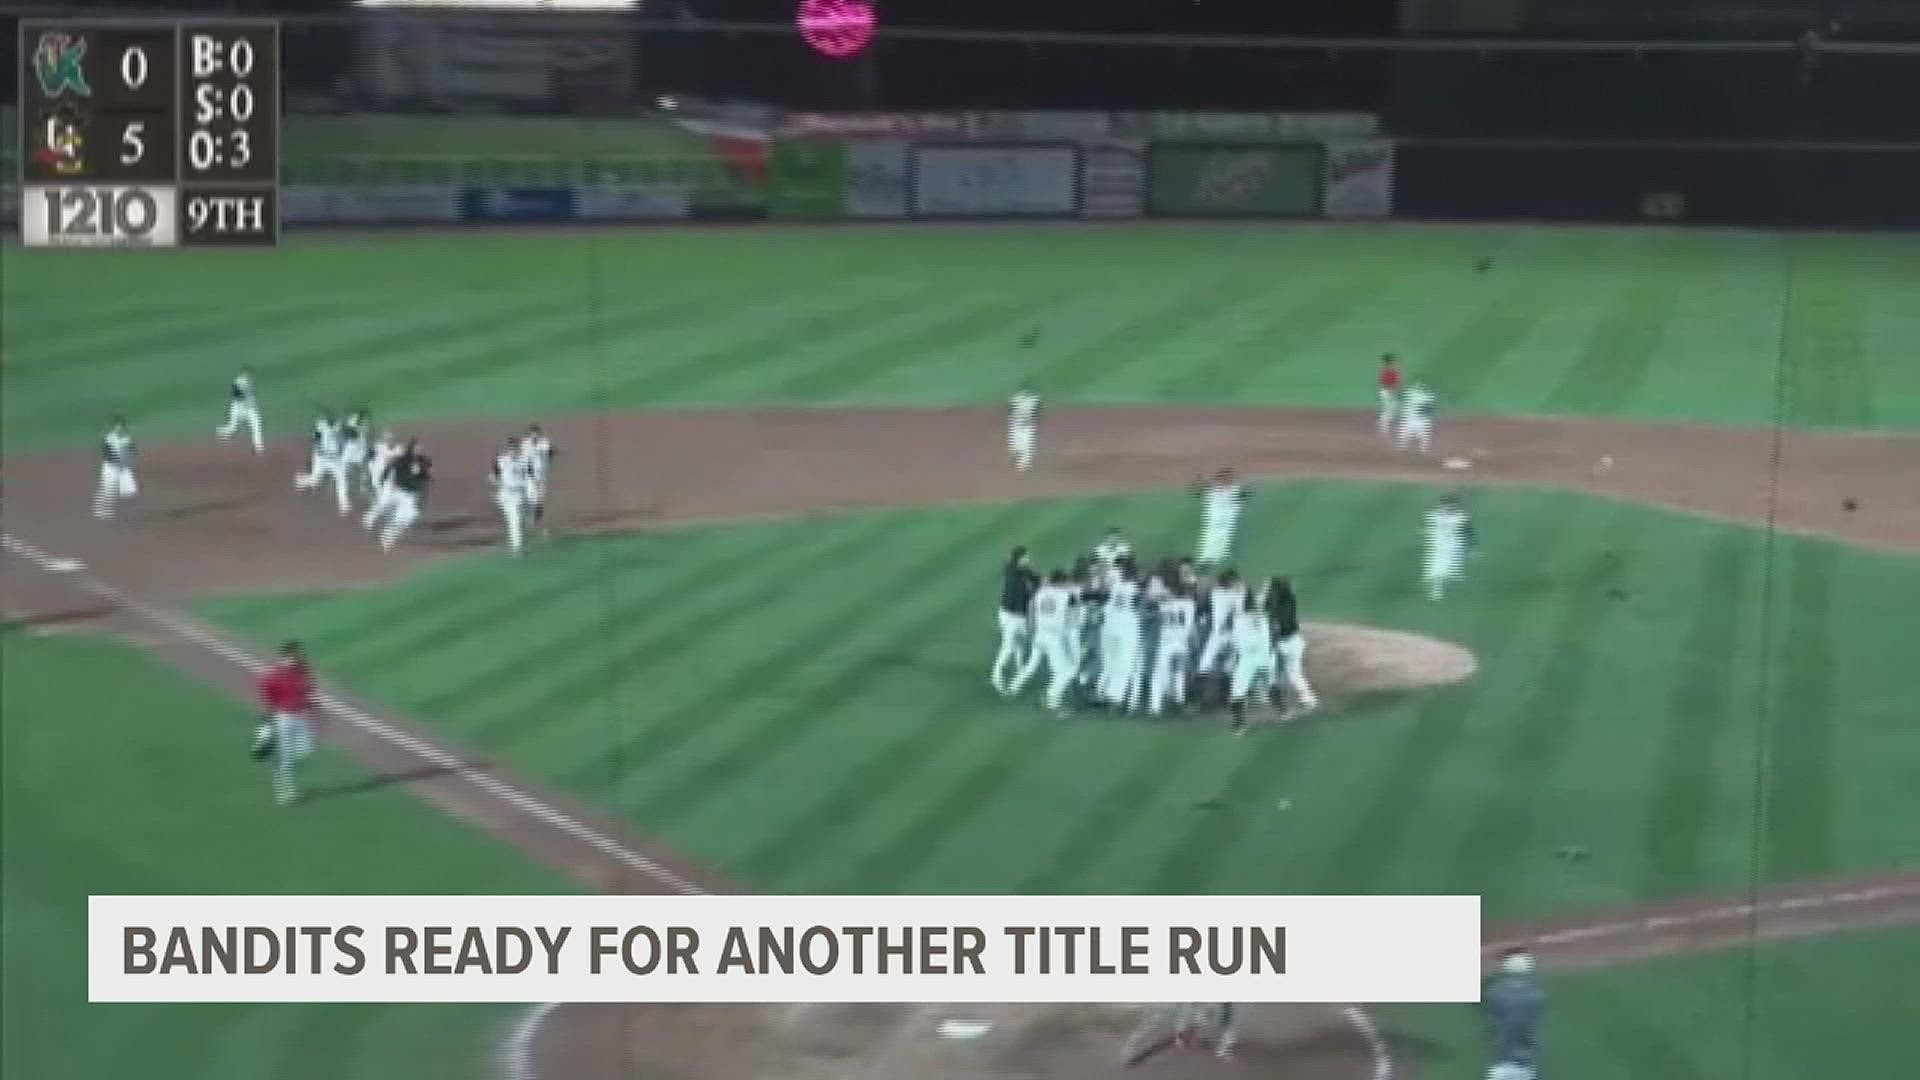 The Quad Cities River Bandits will look to defend their High-A title beginning Opening Day on April 8 against the South Bend Cubs.